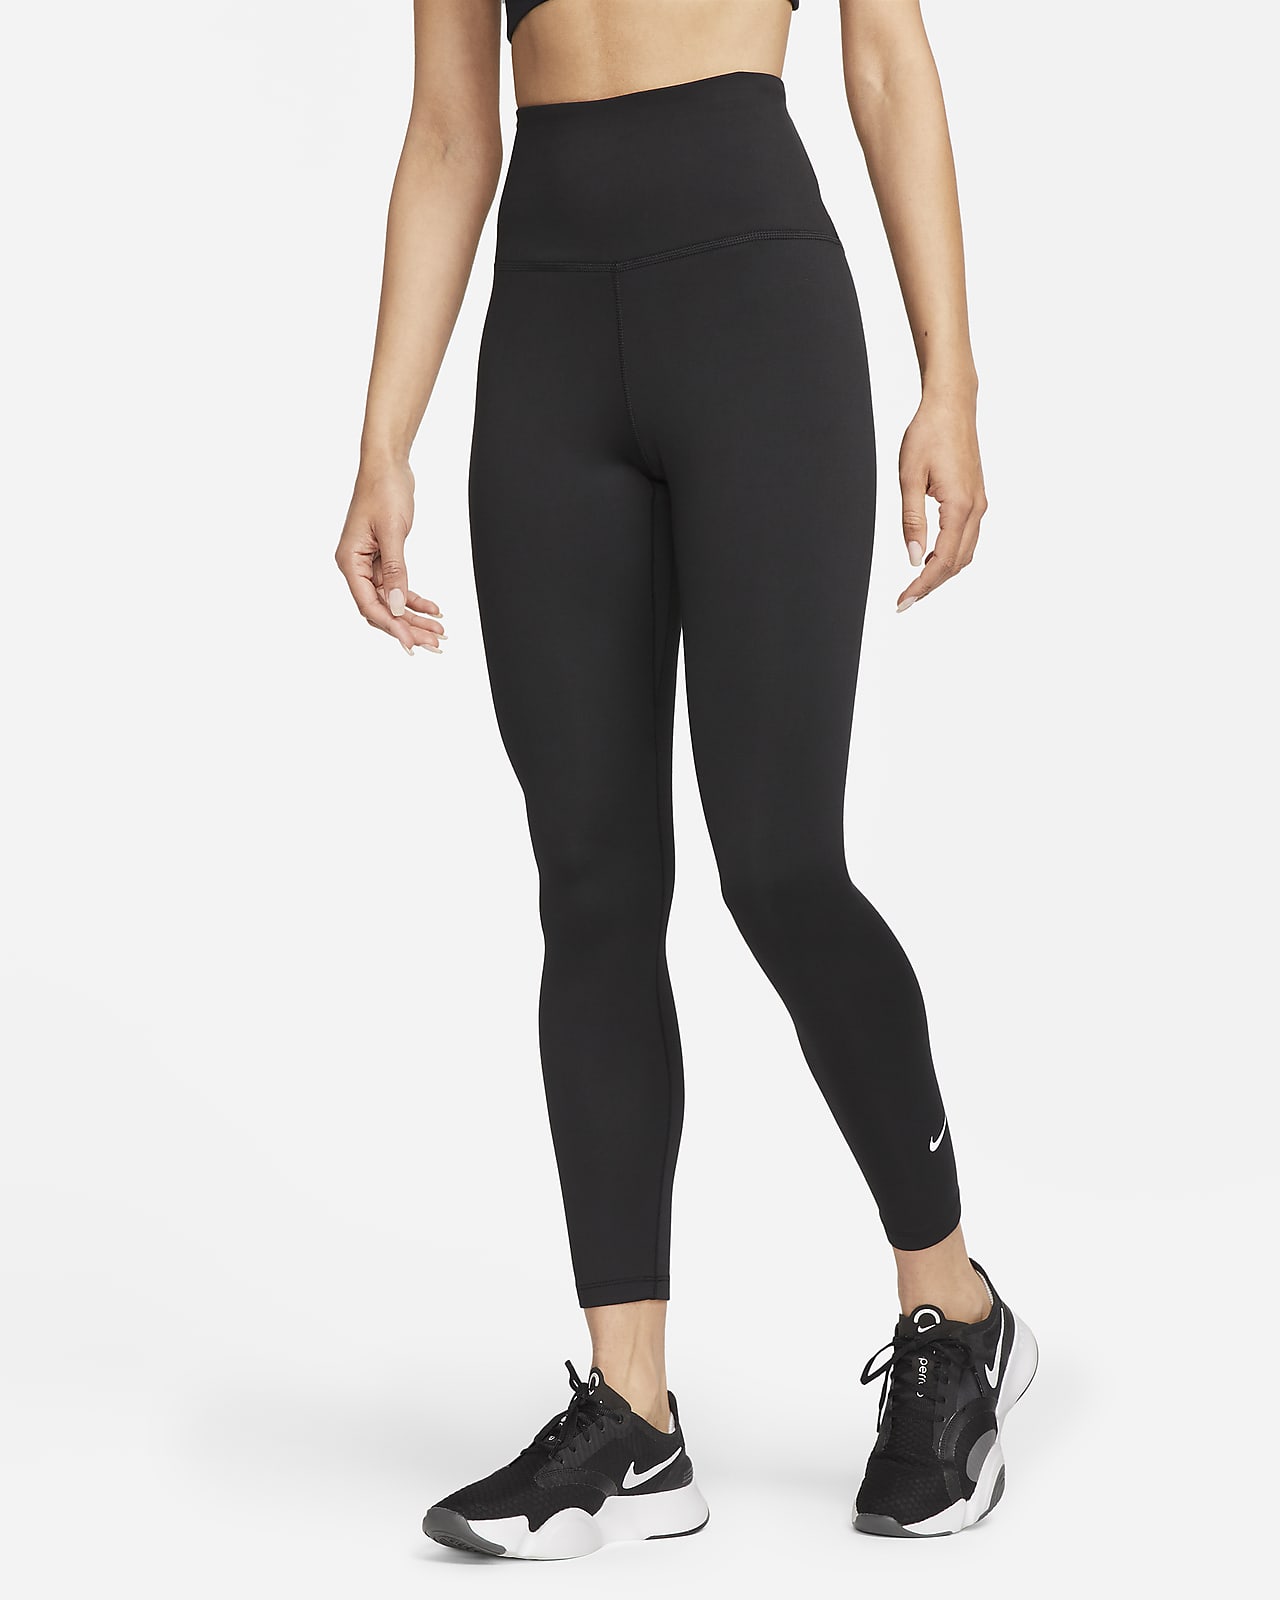 One Women\'s Nike 7/8 Leggings. Therma-FIT High-Waisted